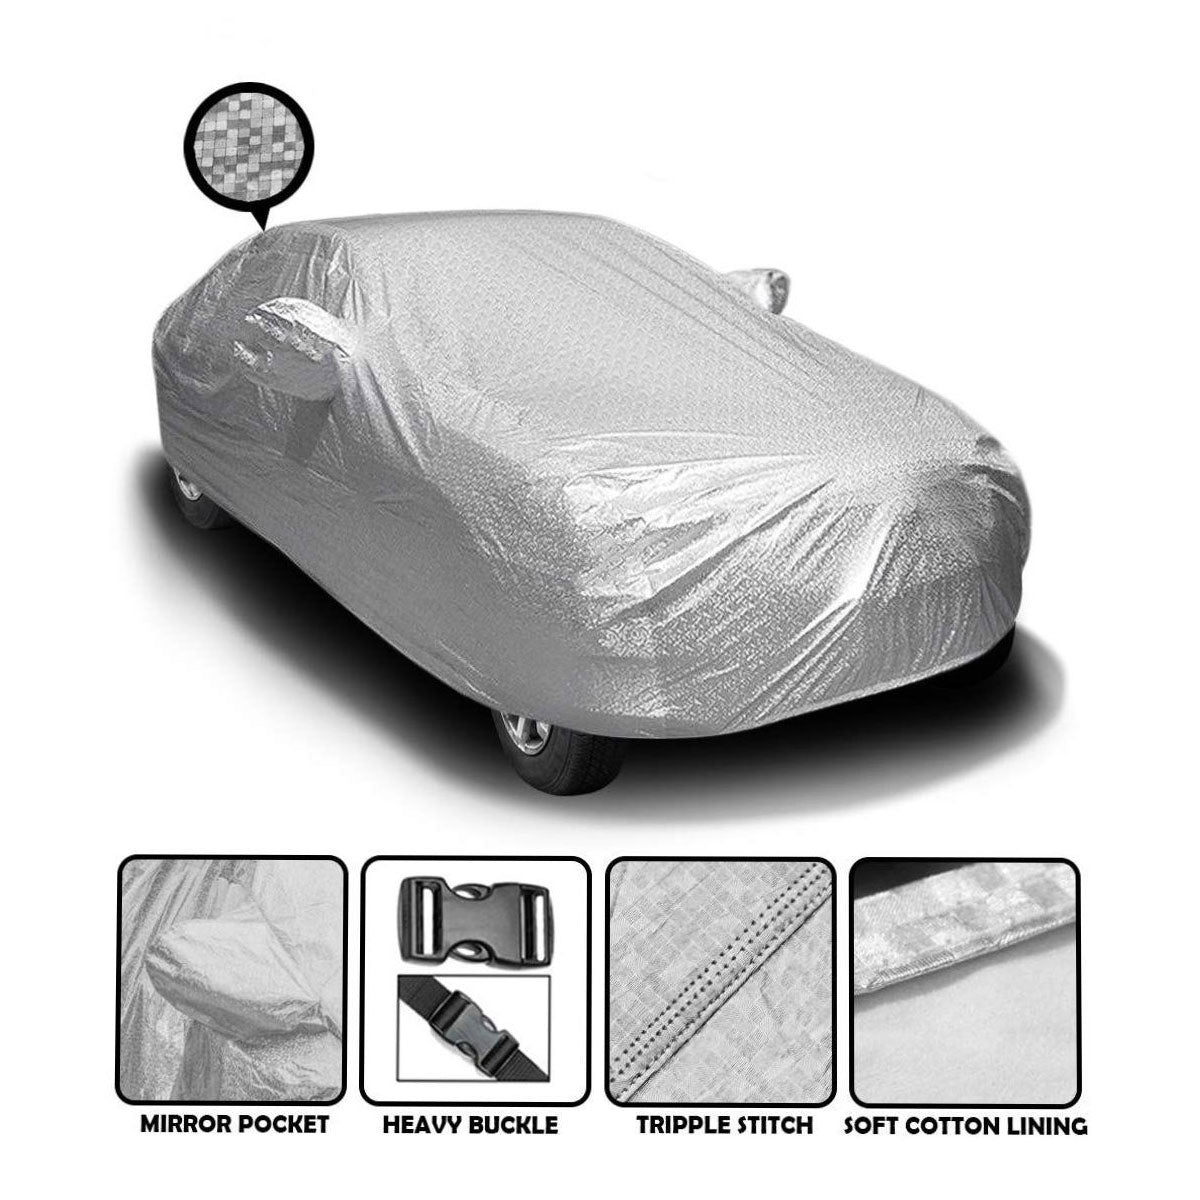 Oshotto Spyro Silver Anti Reflective, dustproof and Water Proof Car Body Cover with Mirror Pockets For Toyota Innova